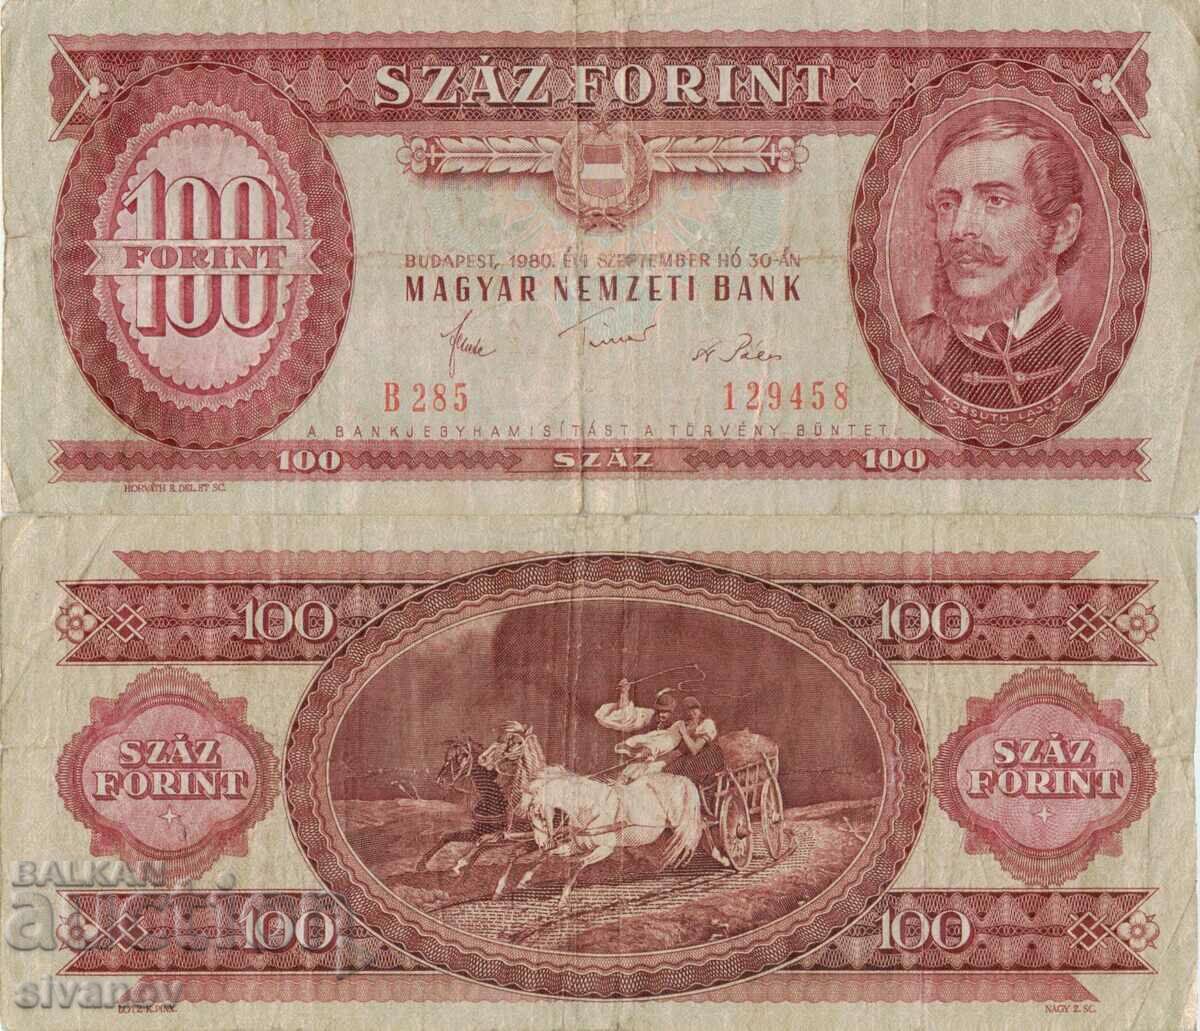 Hungary 100 forint 1980 banknote #5205